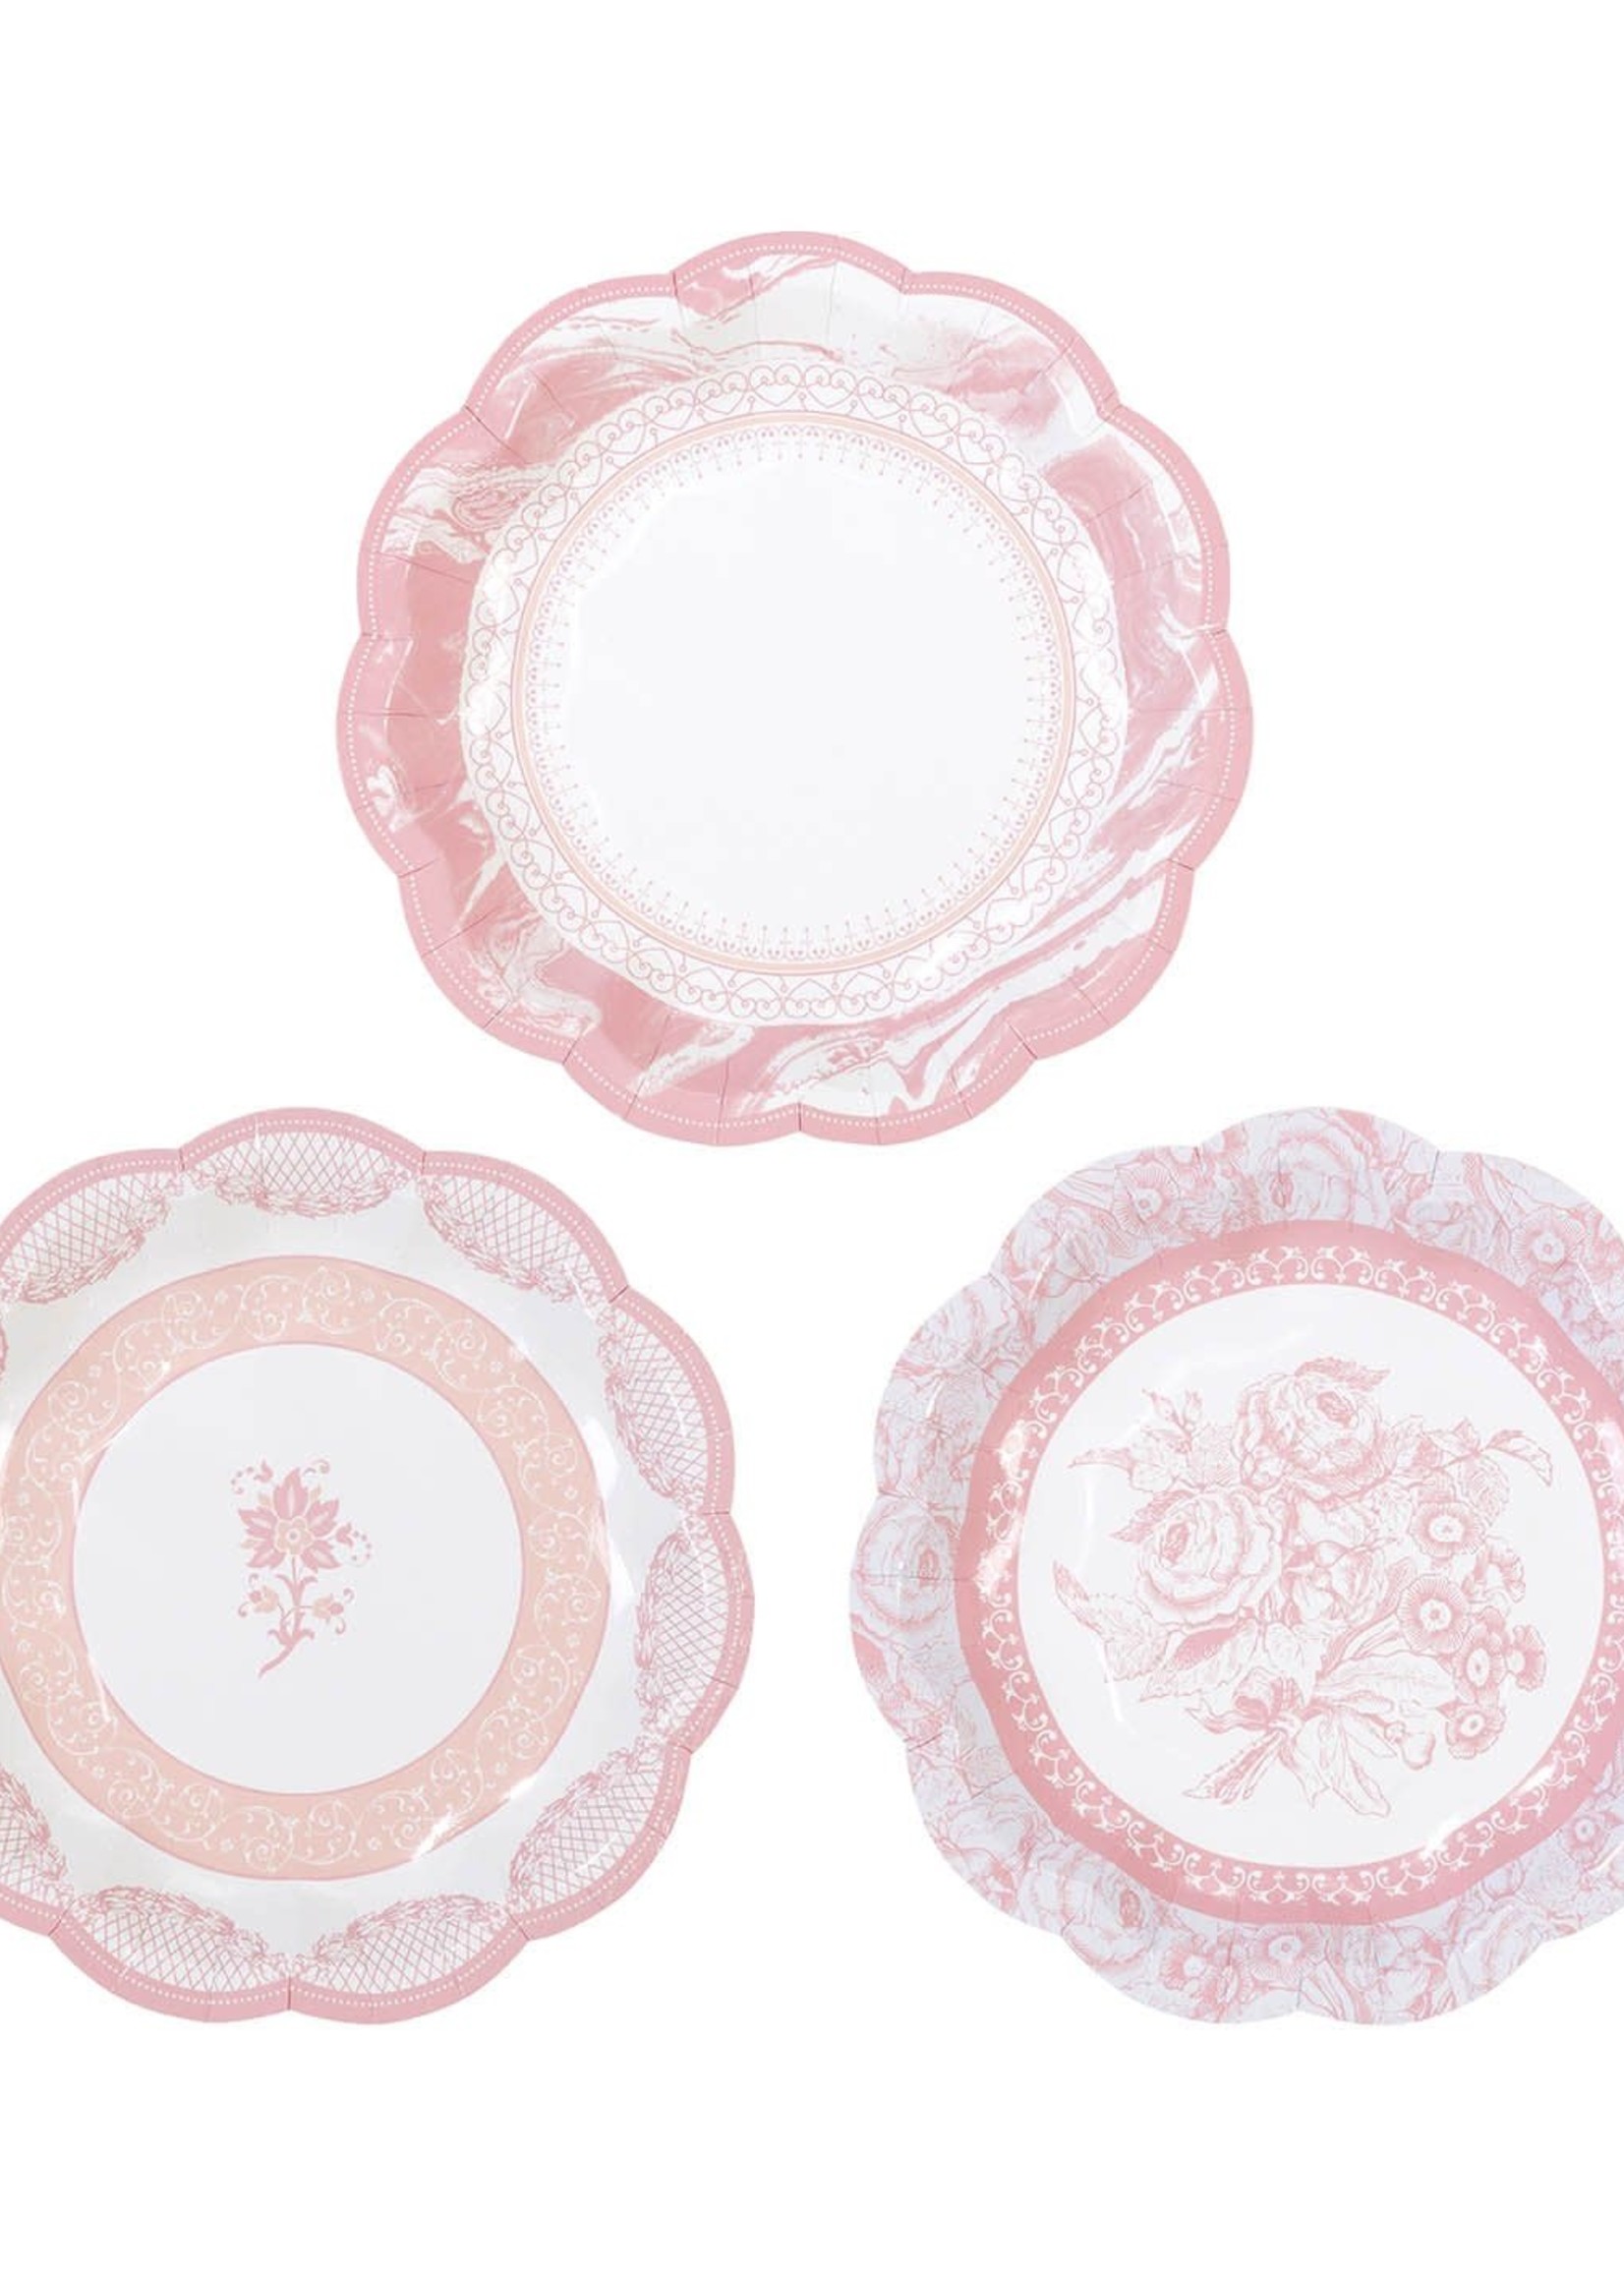 Creative Twist Events Patty Porcelain Rose Scalloped Plates